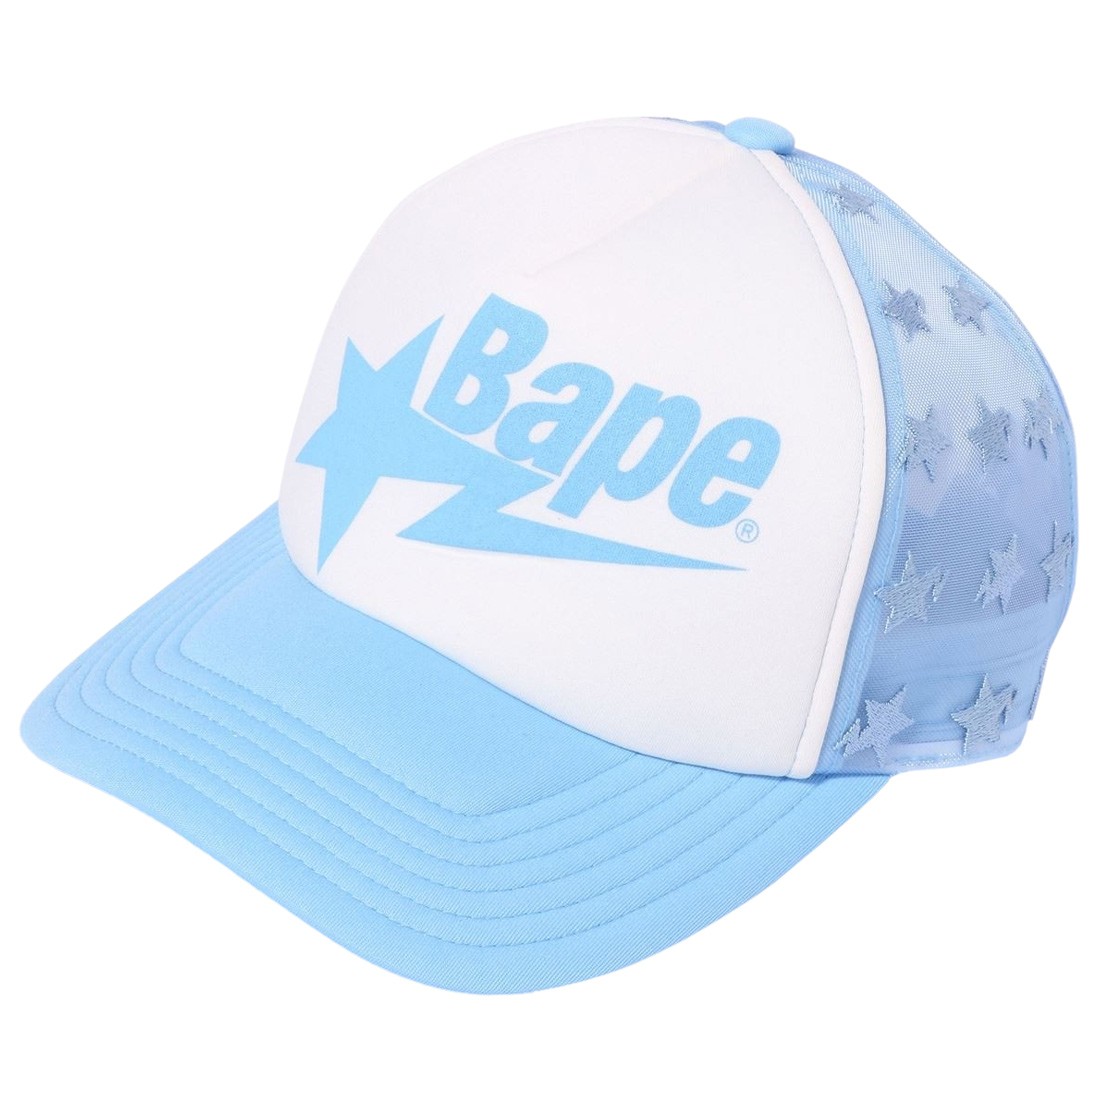 This cap will serve you well on particularly warm days